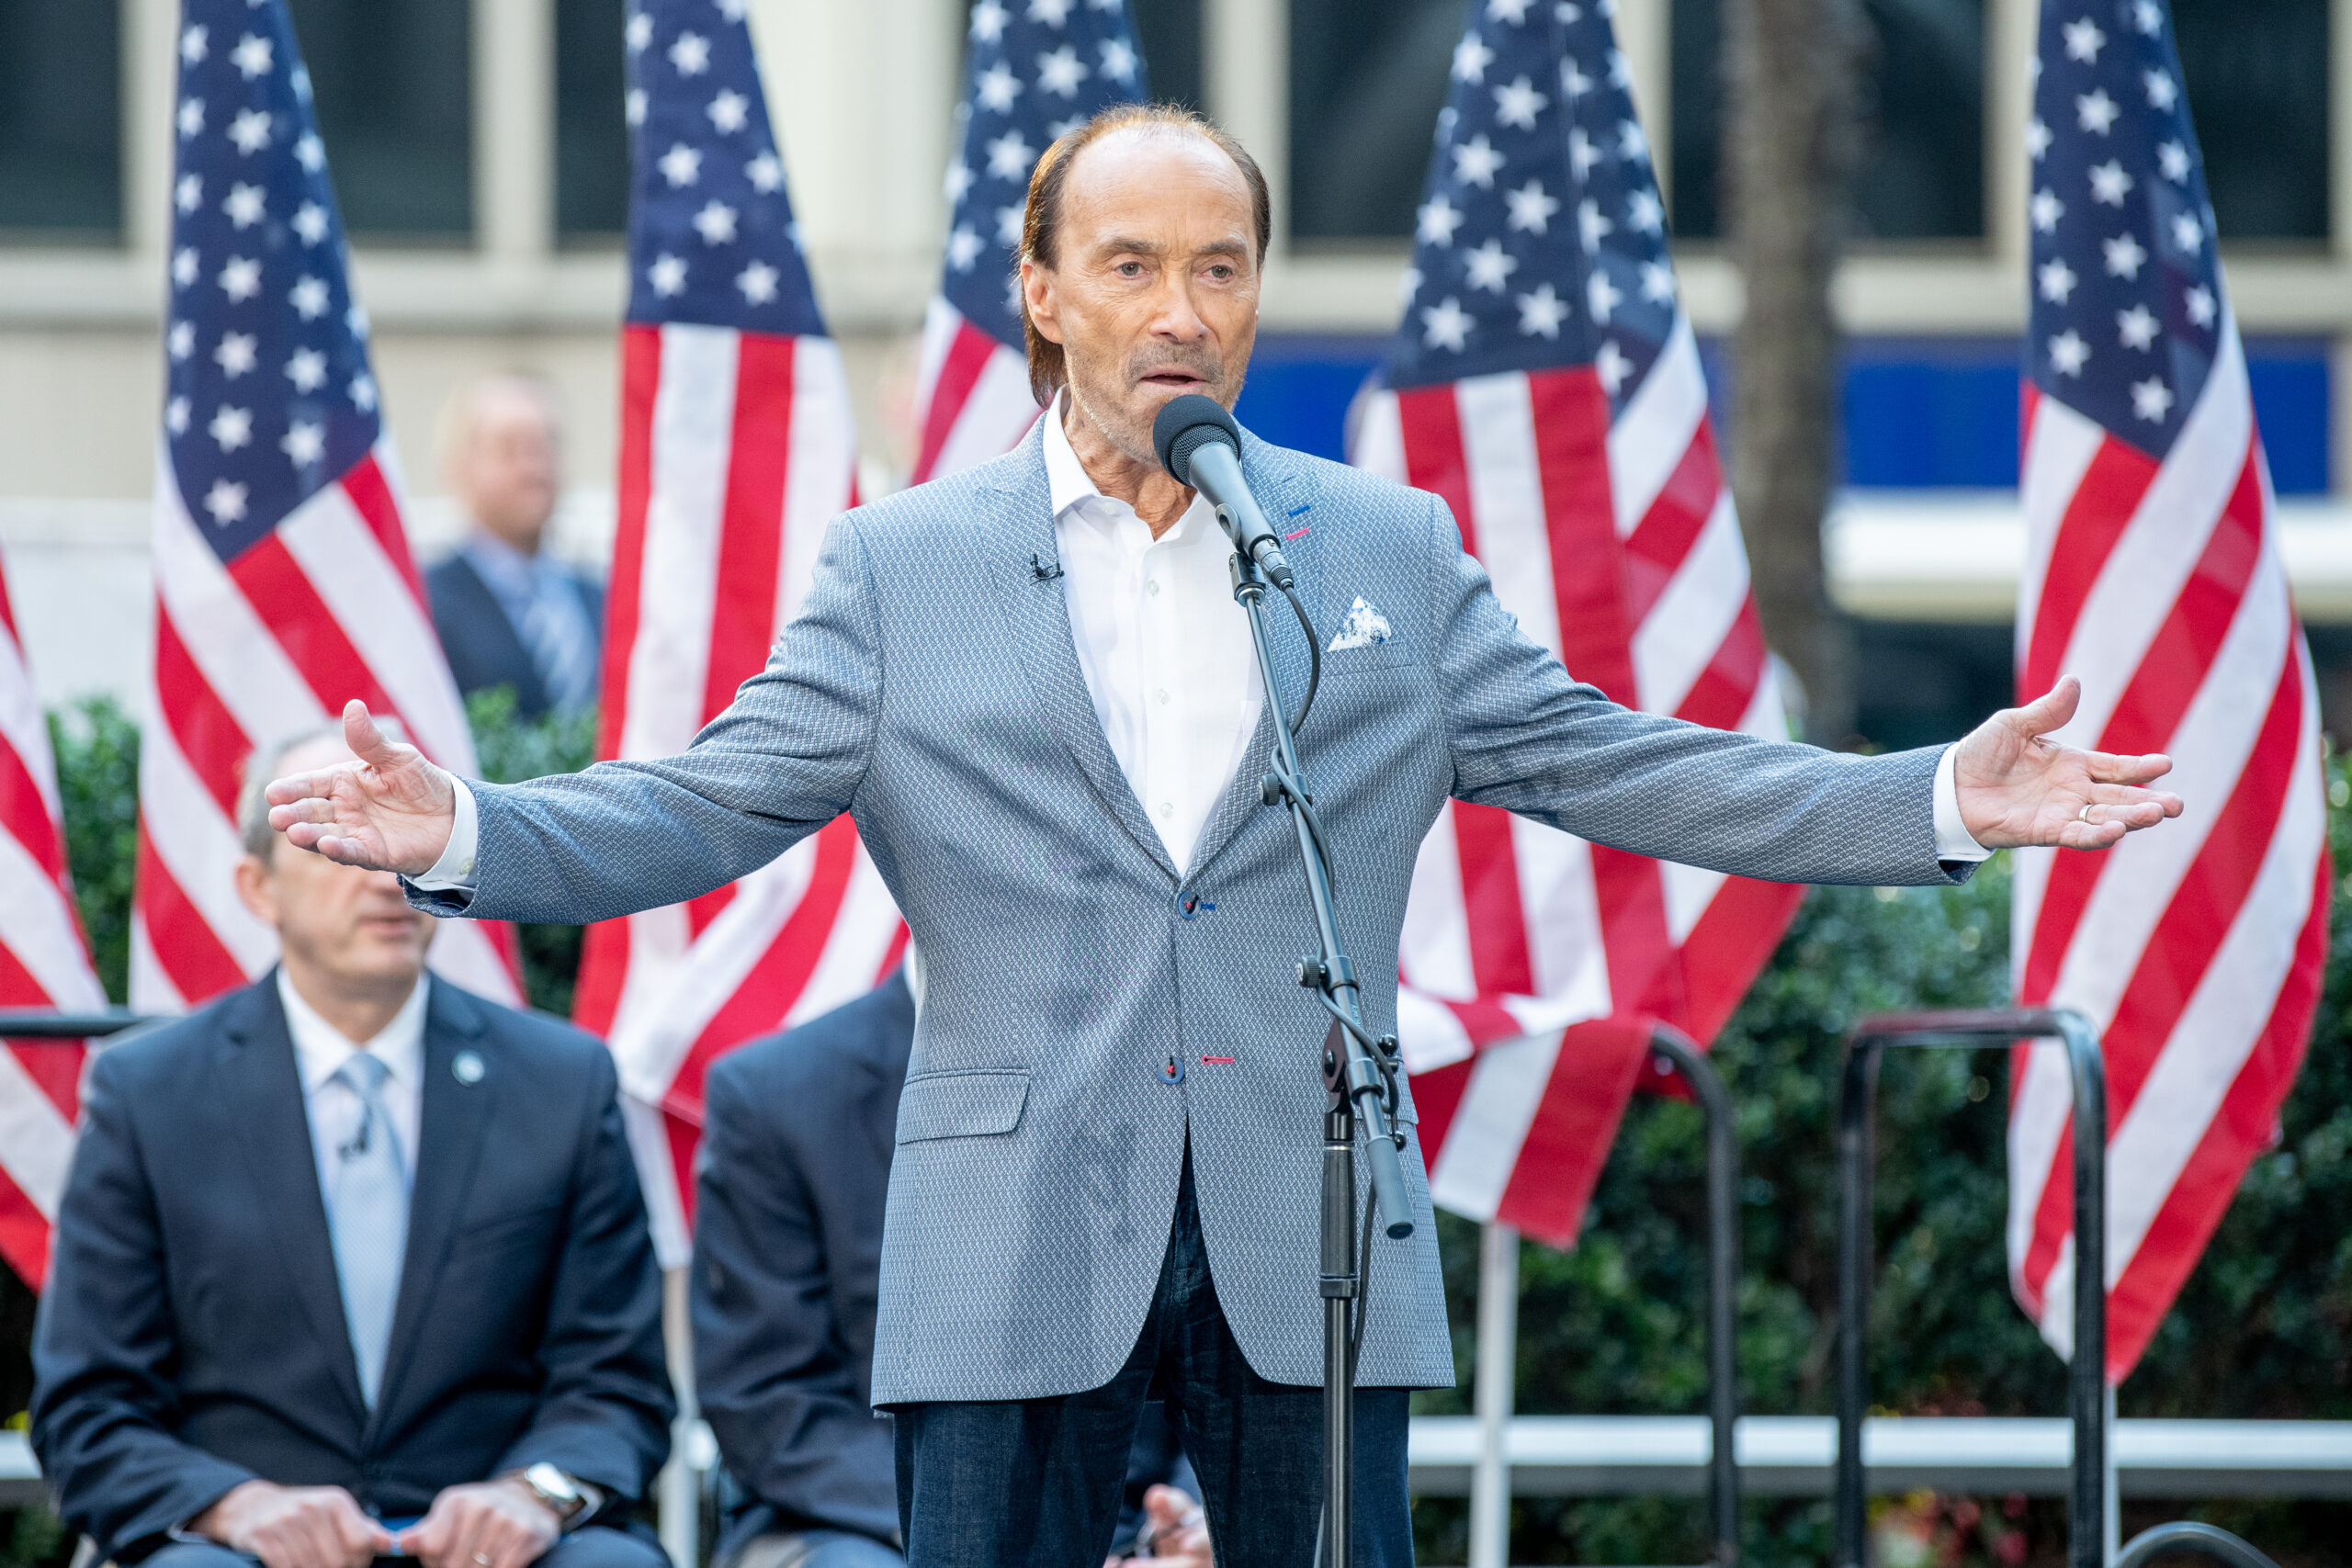 Did 'God Bless the USA' composer Lee Greenwood flee to Canada to avoid serving in Vietnam?